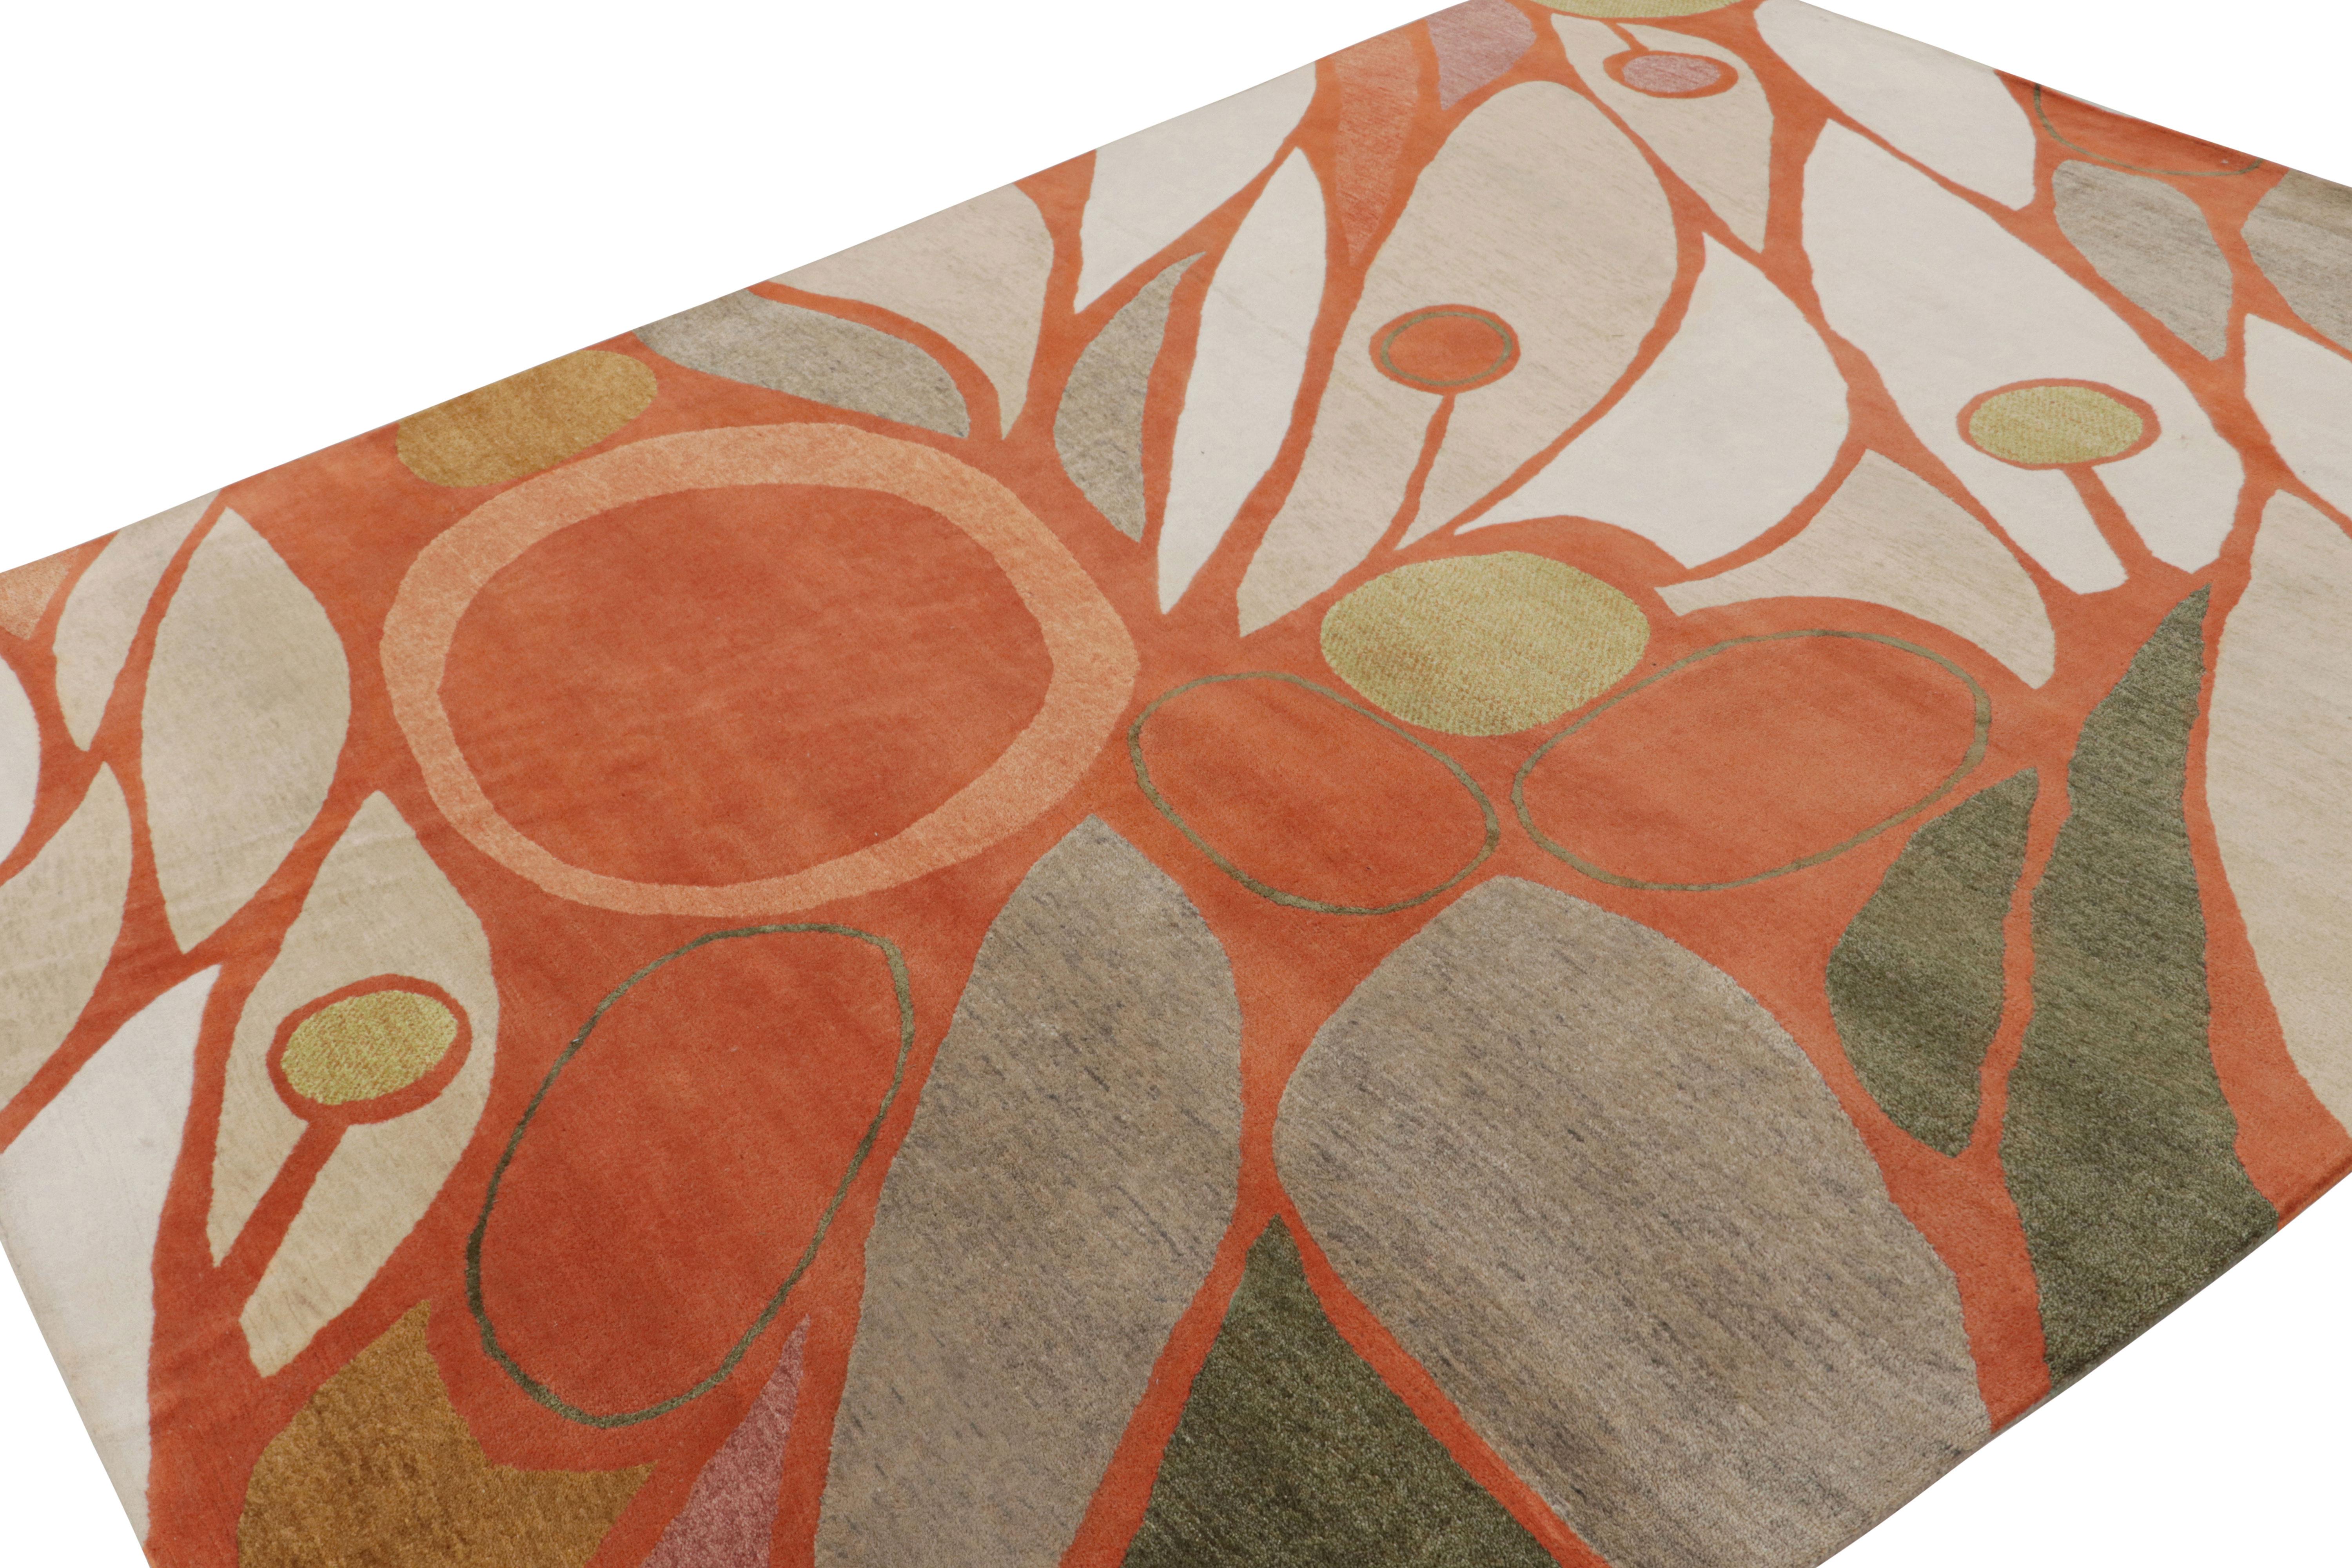 Rug & Kilim X Jenn Ski Orange Mid-Century Modern Rug with Geometric Patterns
Description:  This hand-knotted wool and silk  8x10 modern rug represents an exclusive design from Rug & Kilim’s Mid-Century Modern rug collection. A collaboration with